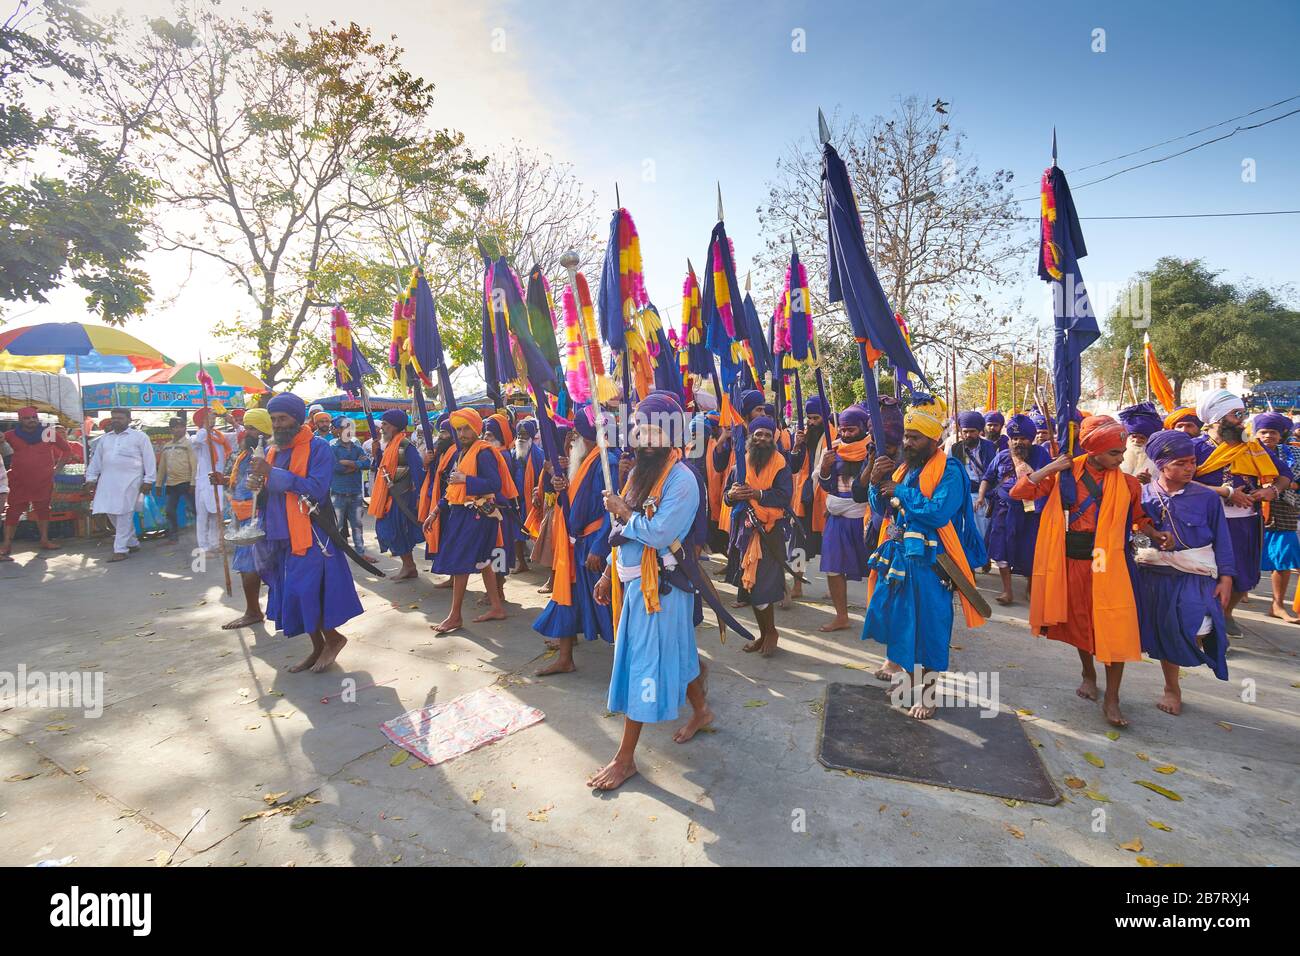 Nihang Singhs march from one Gurudwara to another celebrating the festival of Hola Mohalla in Anandpur Sahib, Punjab, India Stock Photo